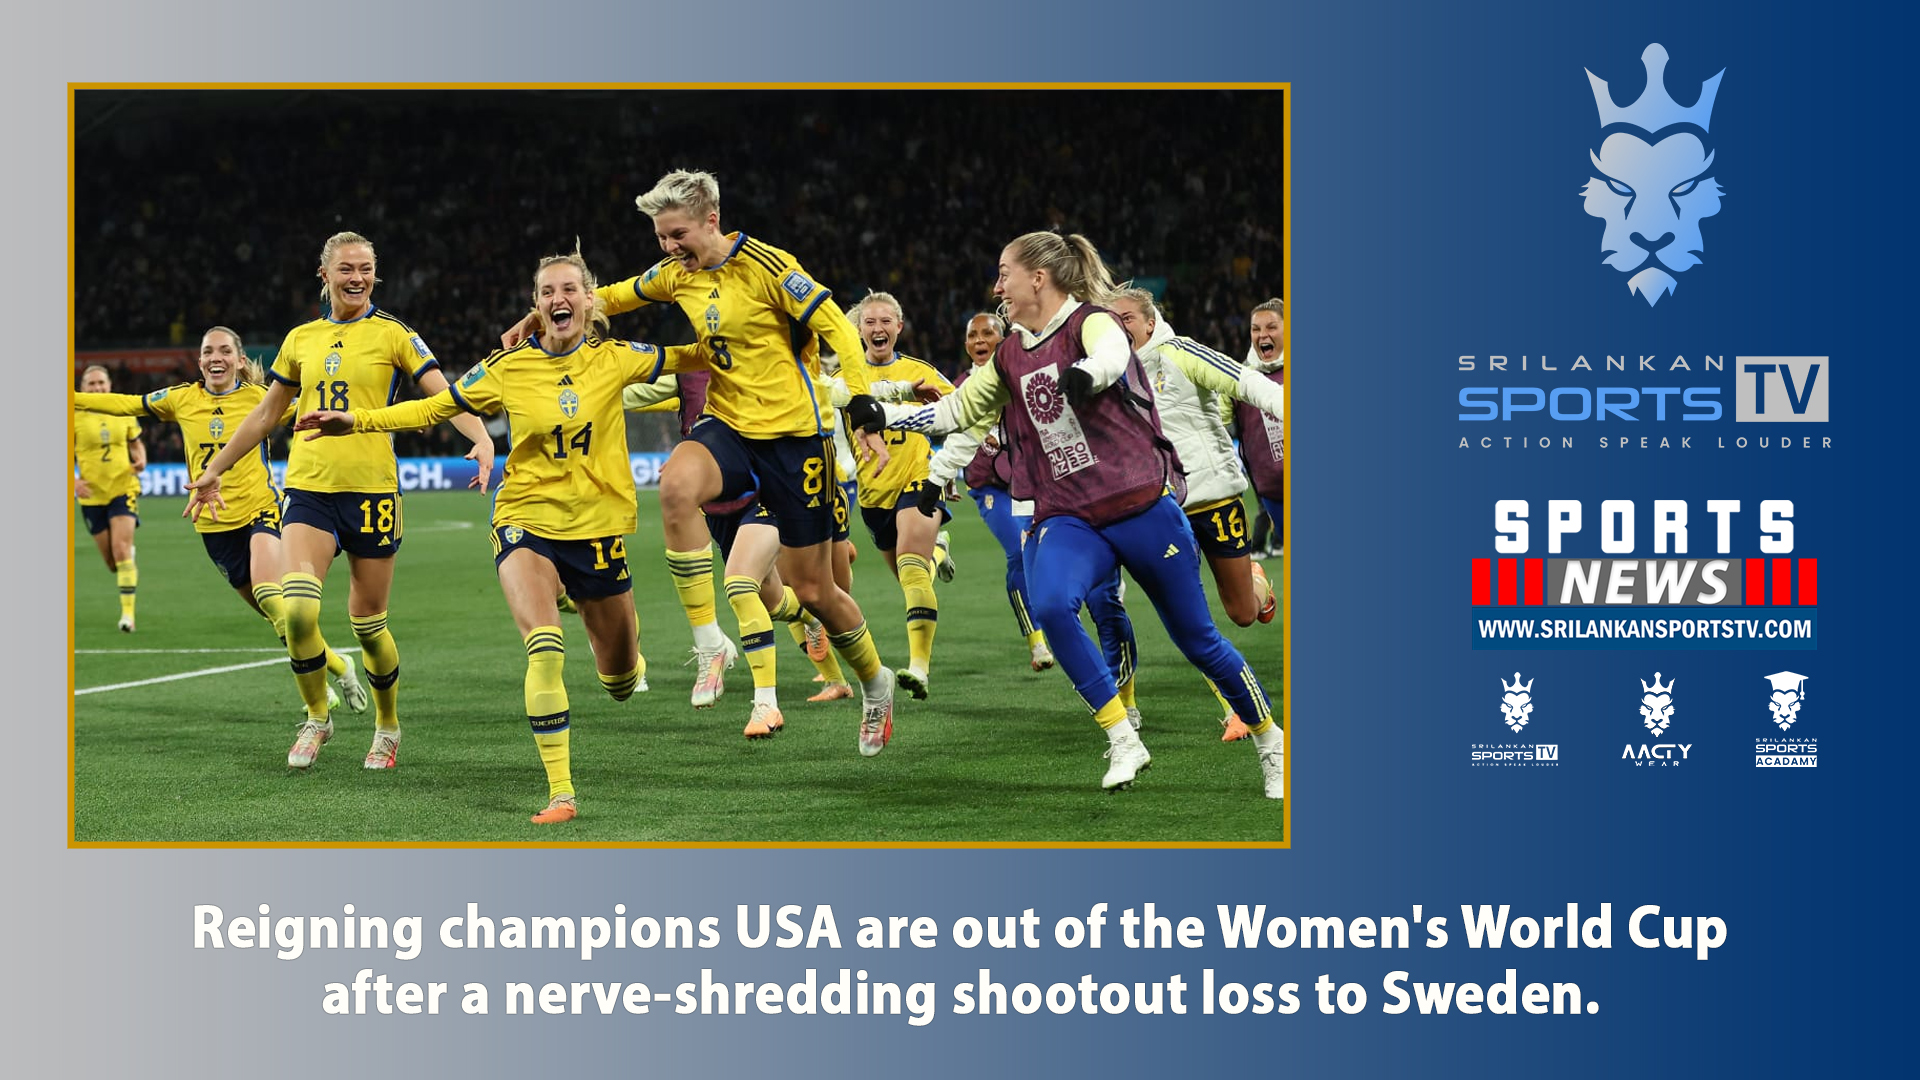 Reigning champions USA are out of the Women’s World Cup after a nerve-shredding shootout loss to Sweden.